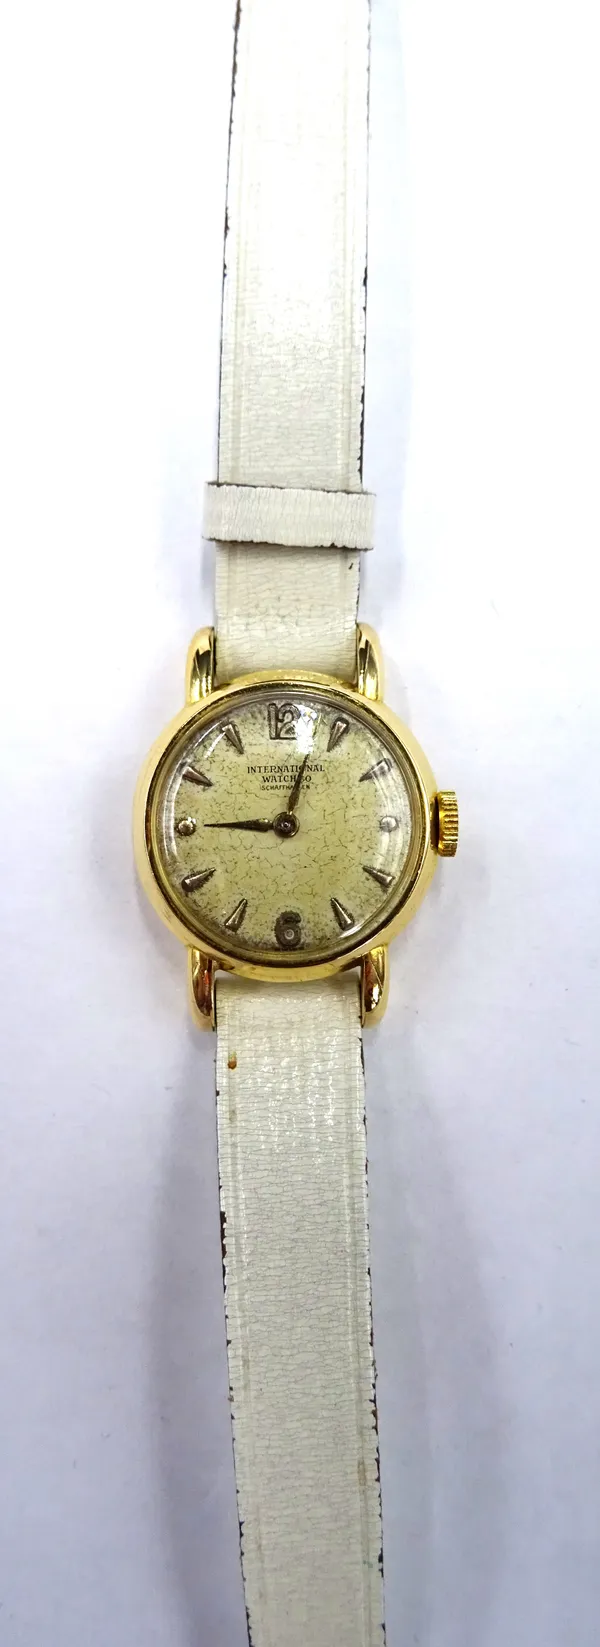 An International Watch Company Schaffhausen gold circular cased lady's wristwatch, circa 1950, with a signed jewelled lever movement, detailed within